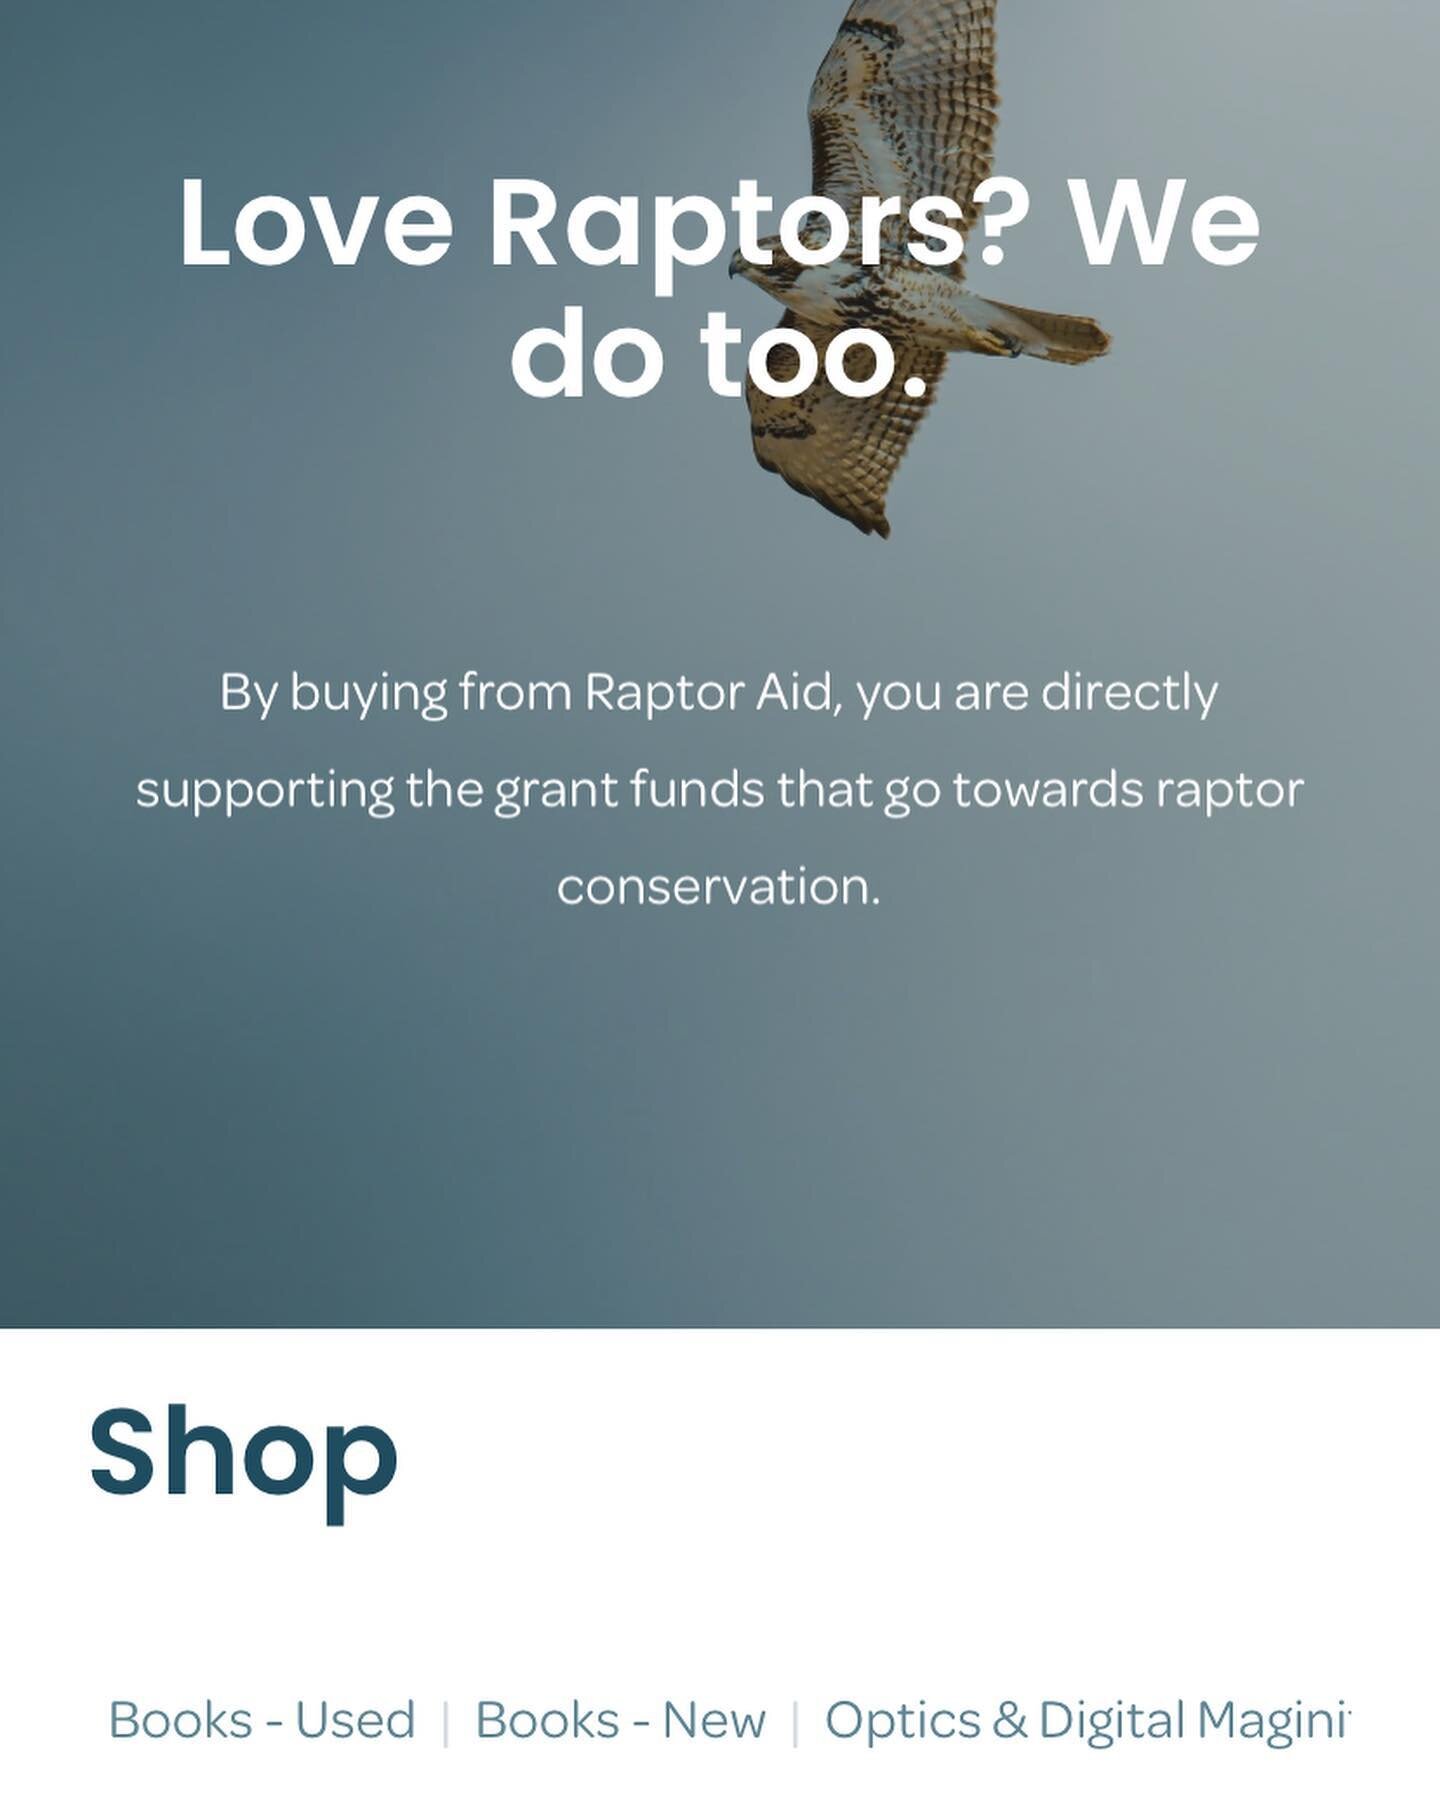 Don&rsquo;t forget you can support us by buying from our shop this Christmas. 🎁🎄🎅

www.raptoraid.com/shop 

Owl pellet kits are still our bestsellers available as both intro and advanced kits. 👩🏽&zwj;🔬🔬

Winter is a great time for getting nest